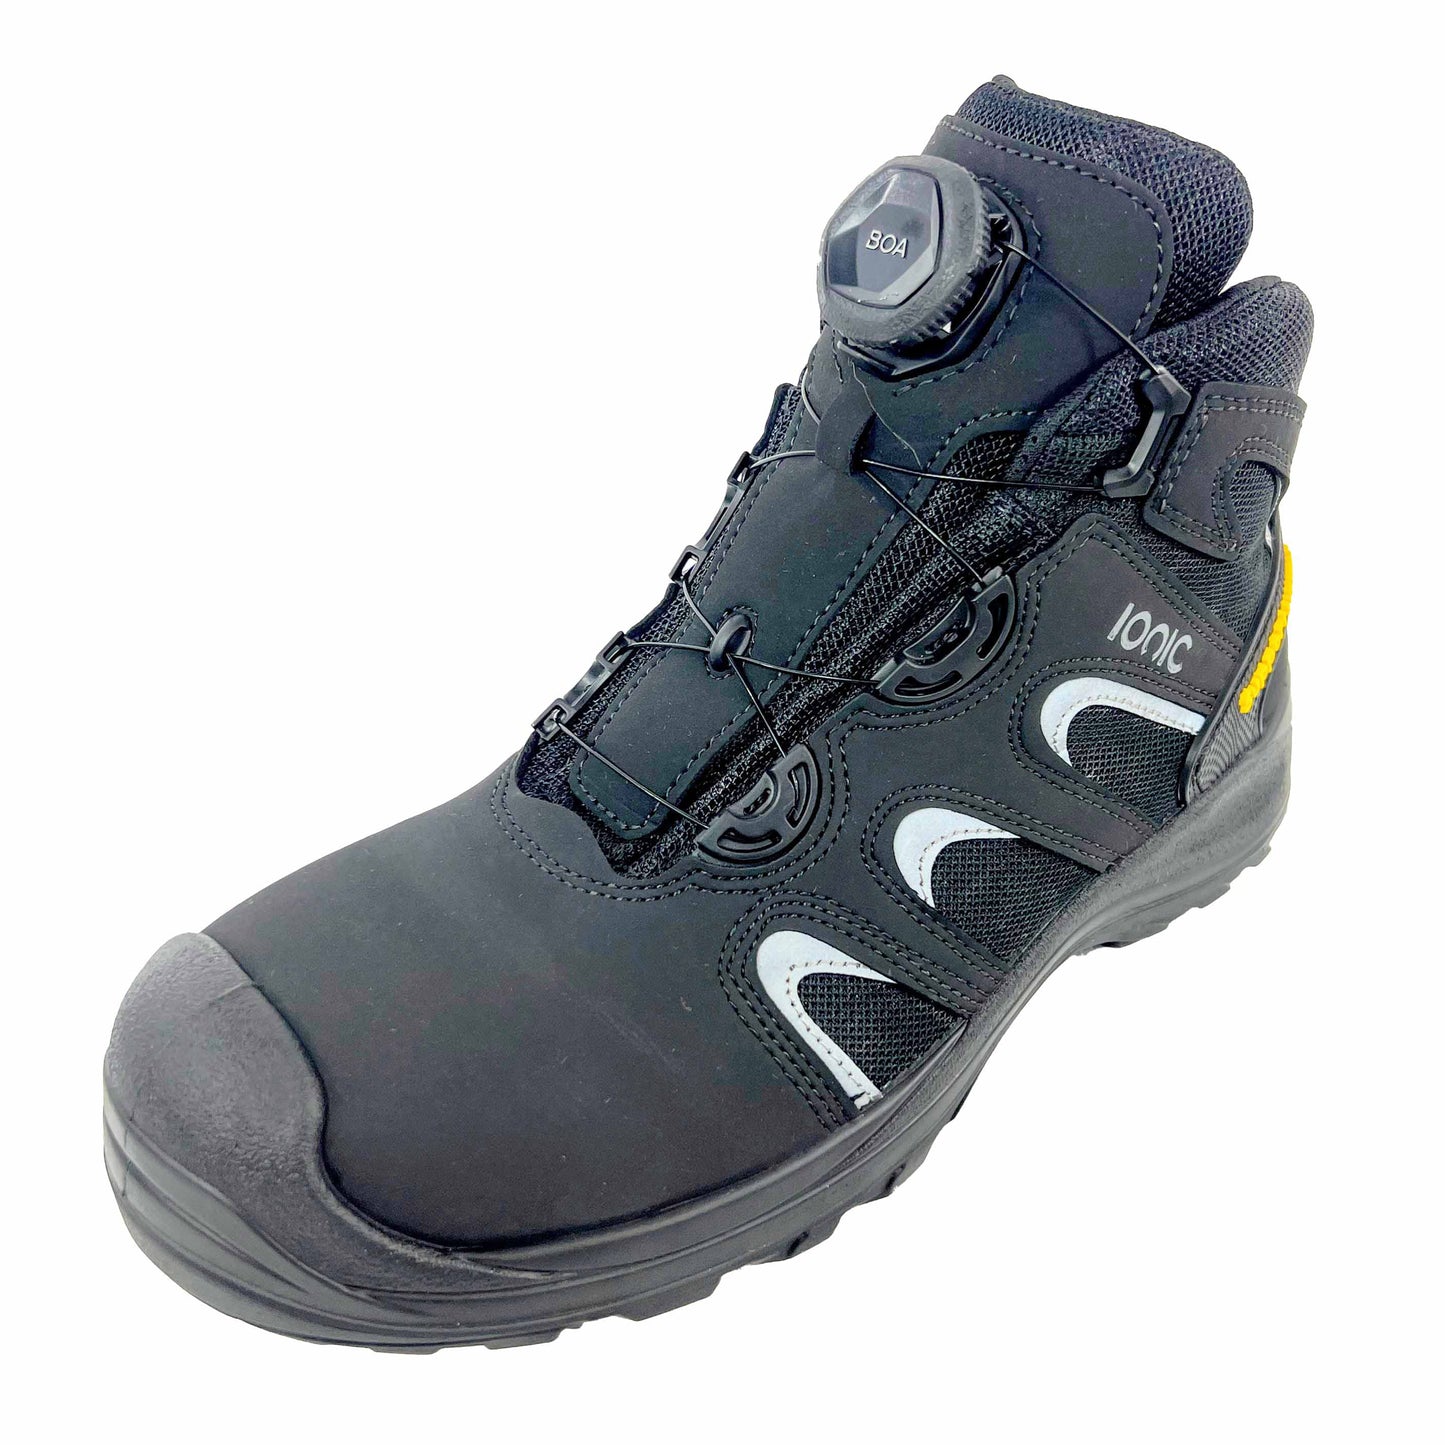 ROCKA WATER RESCUE BOOT